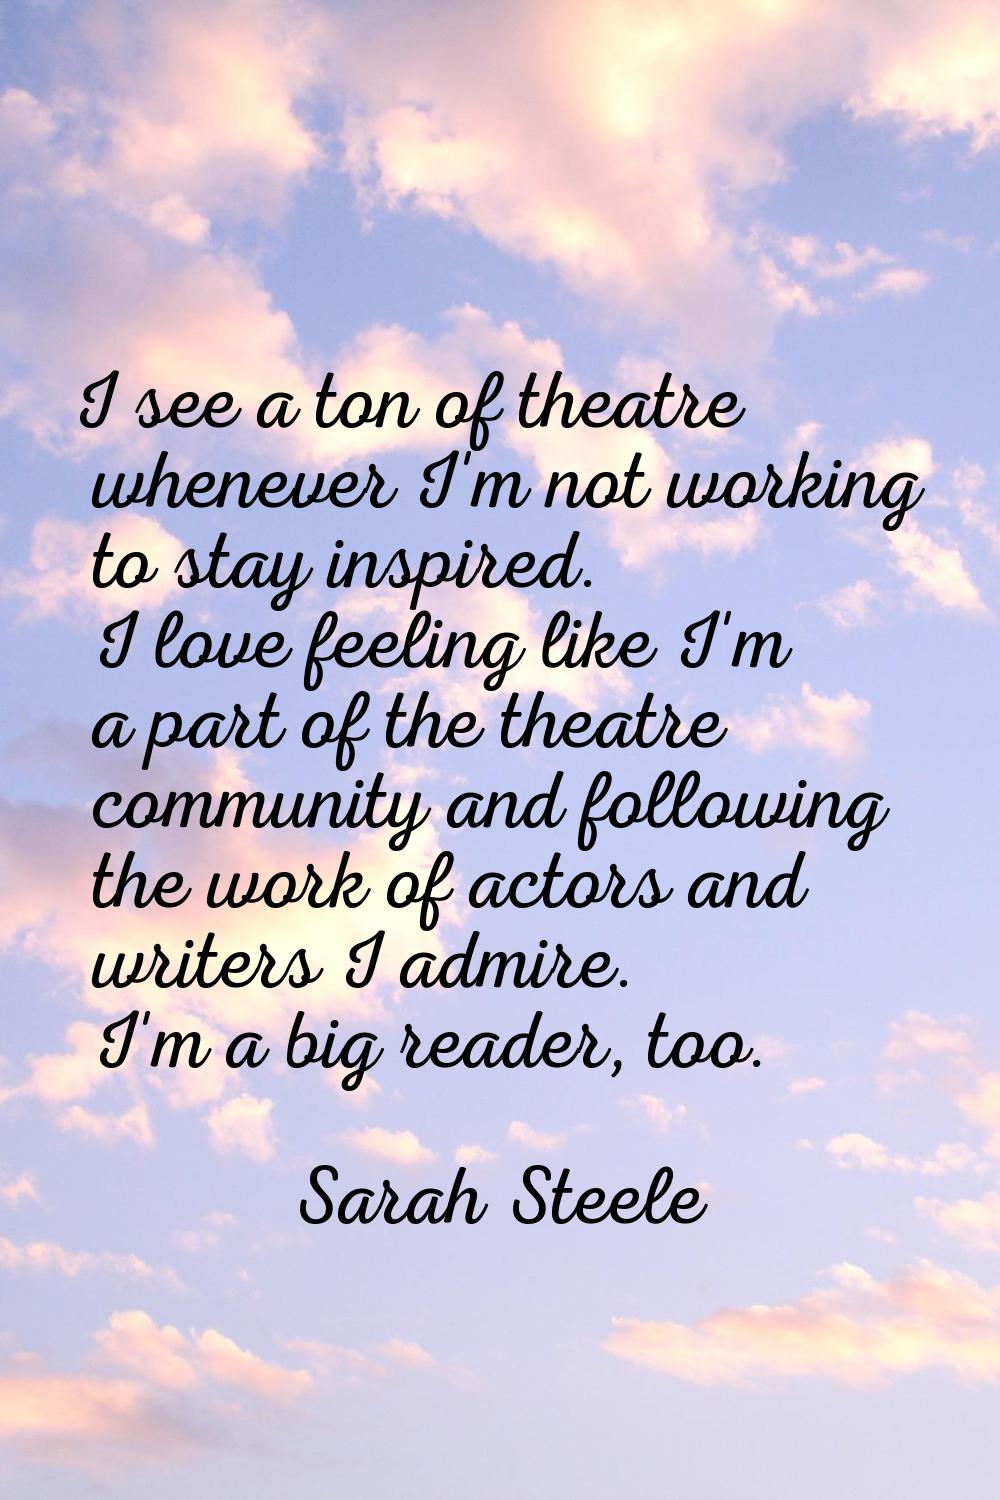 I see a ton of theatre whenever I'm not working to stay inspired. I love feeling like I'm a part of